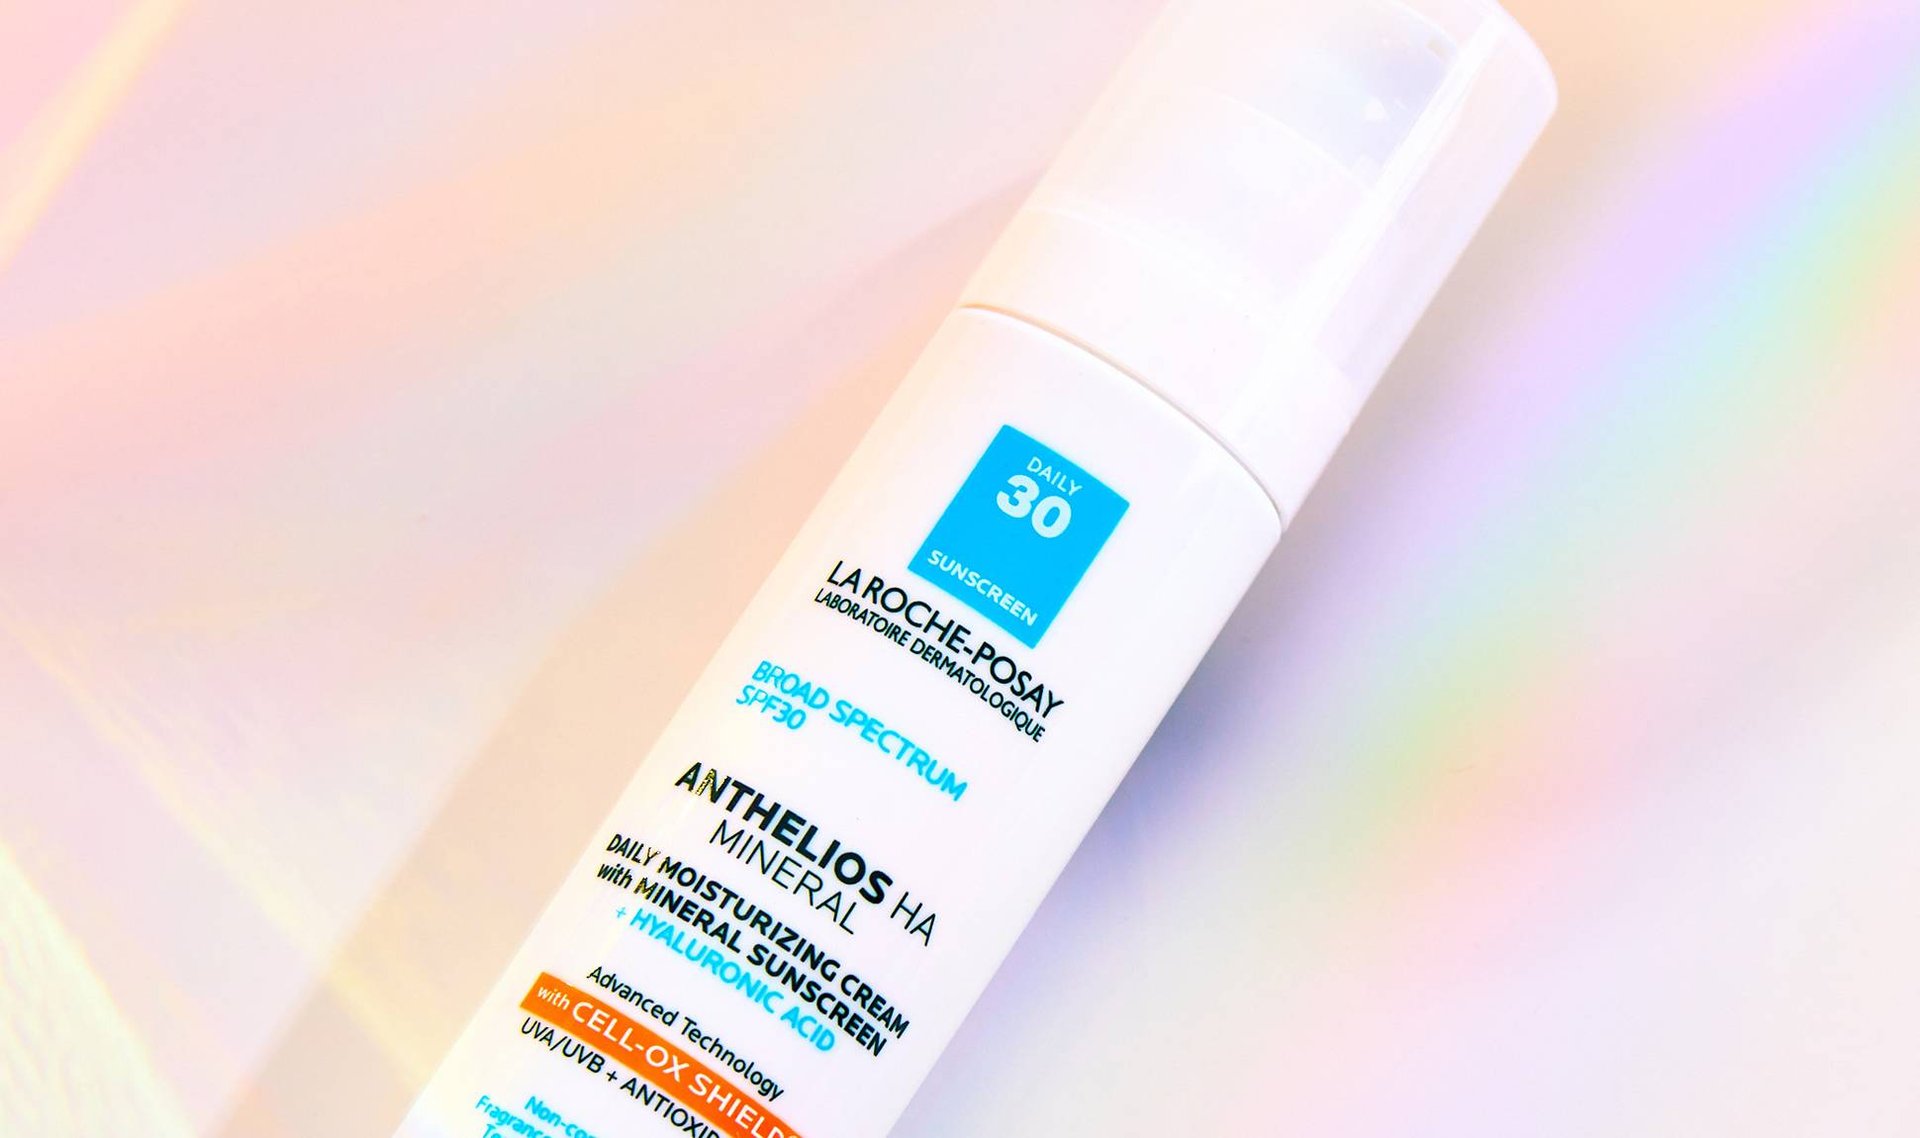 How to Find the Right La Roche-Posay Sunscreen for You